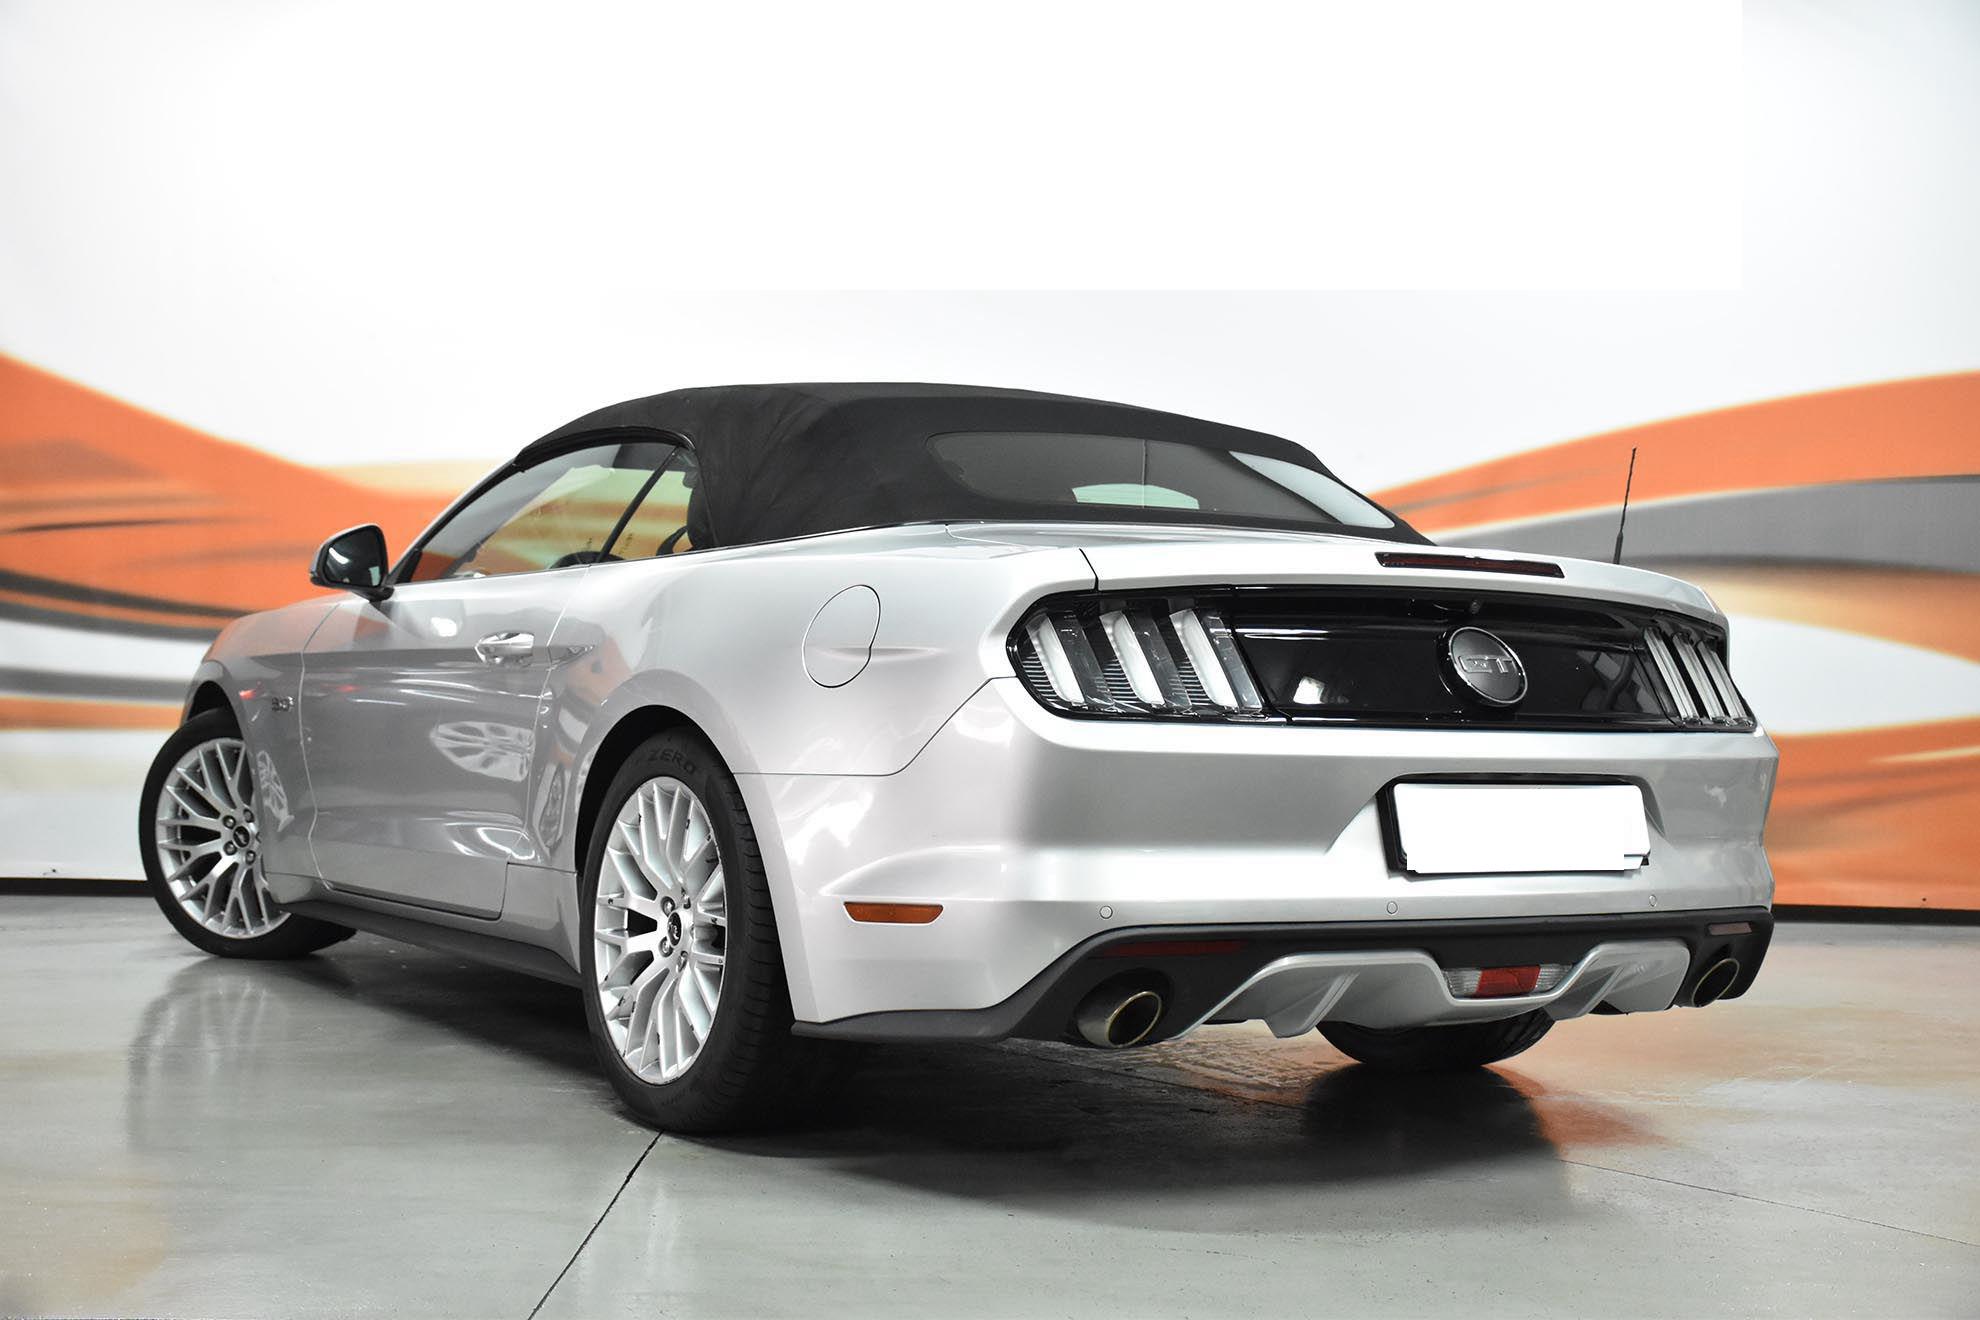 Lhd FORD MUSTANG (01/04/2016) - GREY 